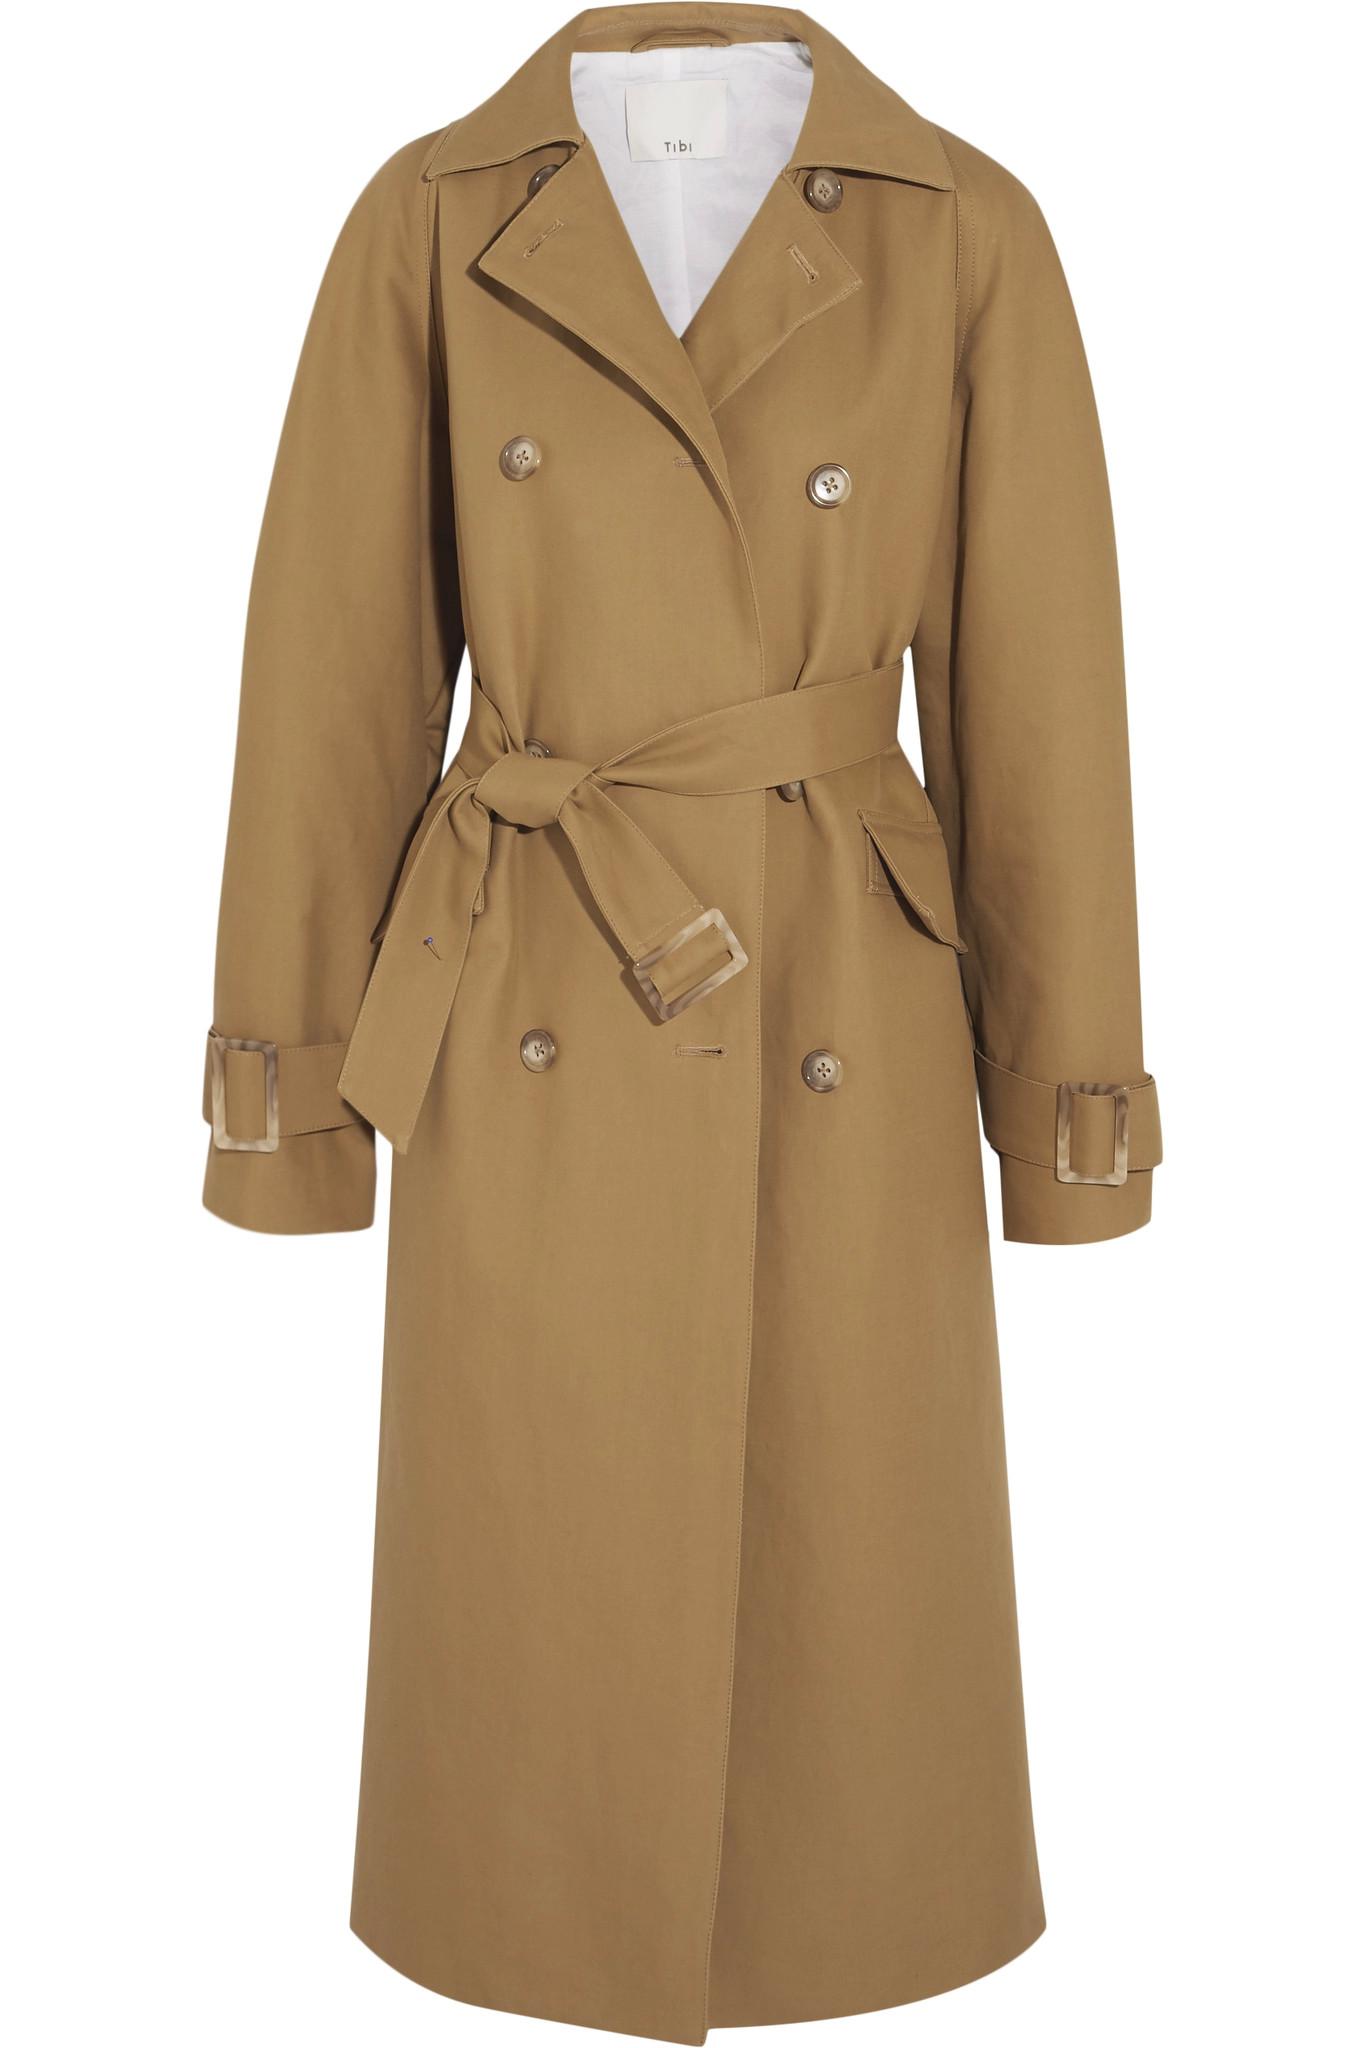 Tibi Oversized Cotton-canvas Trench Coat in Natural | Lyst